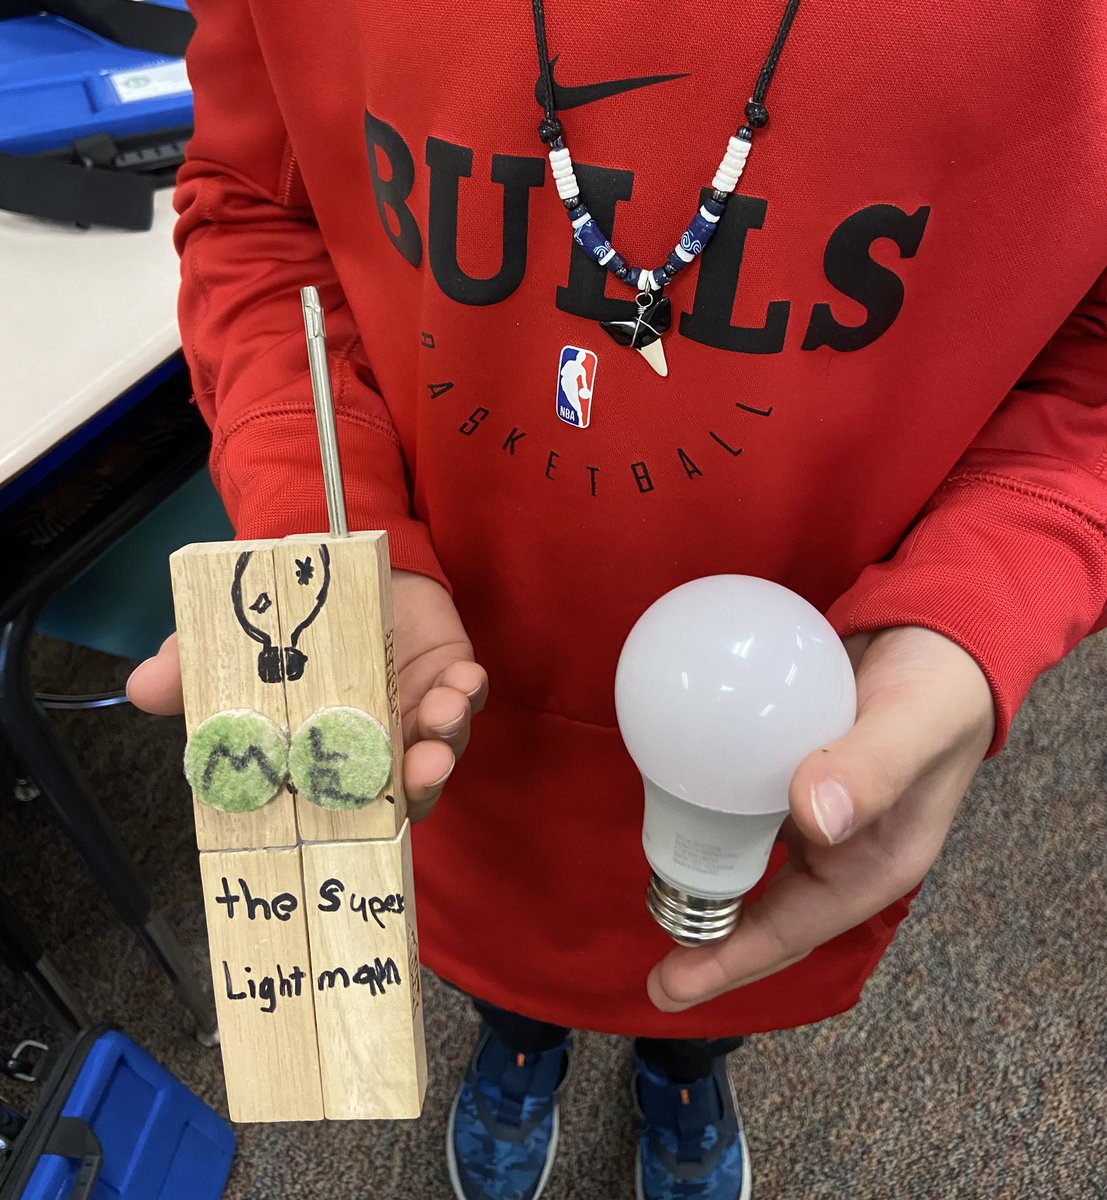 Throughout this @Inquiredlearn inquiry project, 4th graders learned about natural resources and what actions we can take to support sustainability. Check out their creative inquiry project inventions/presentations aimed at promoting sustainability within our school!